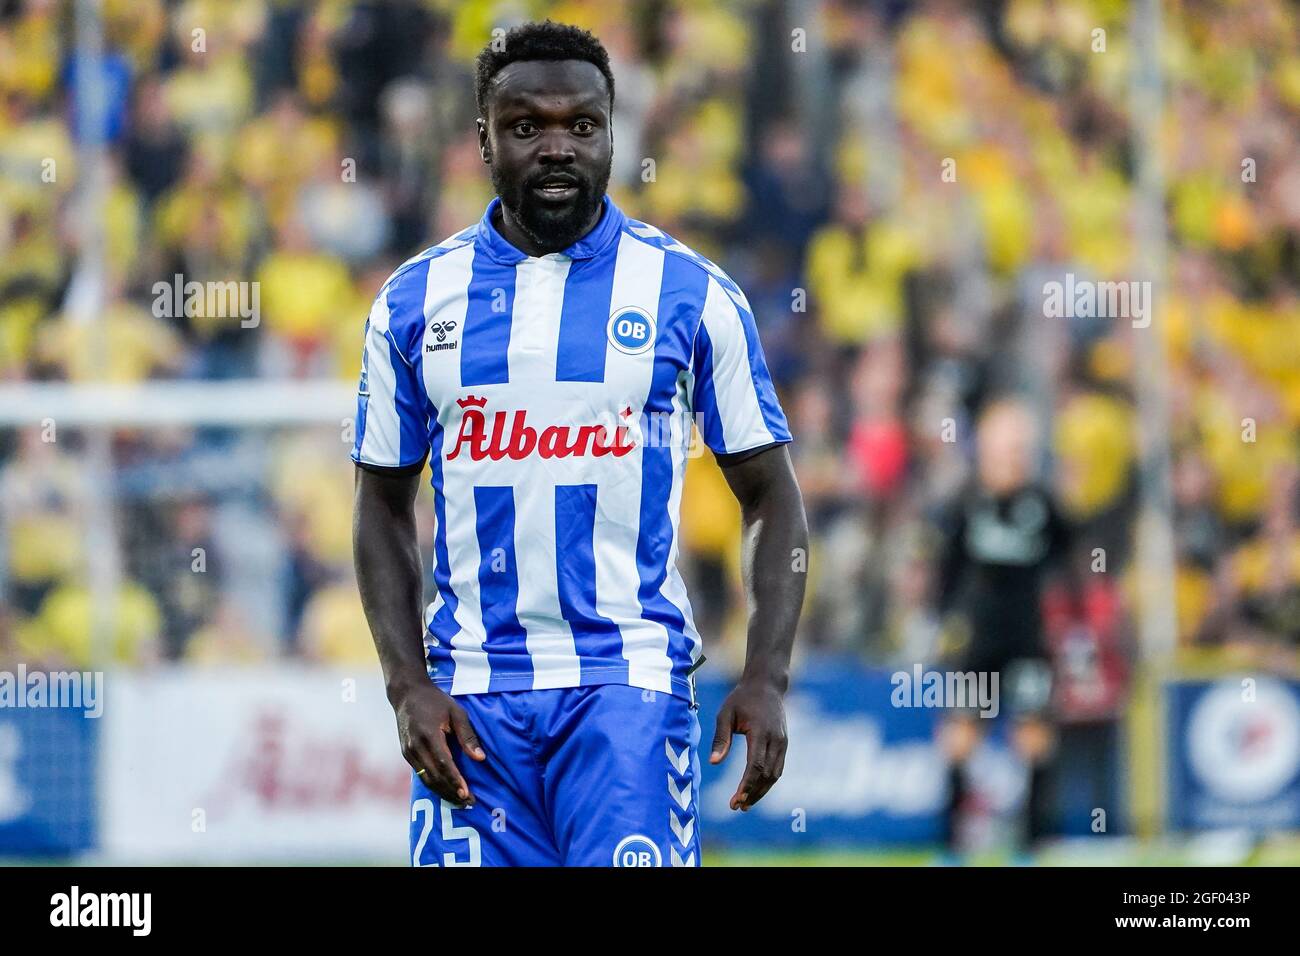 Odense, Denmark. 21st Aug, 2021. Opondo (25) of OB during Superliga match between Odense Boldklub and Broendby IF at Nature Energy Park in Odense. (Photo Credit: Gonzales Photo/Alamy